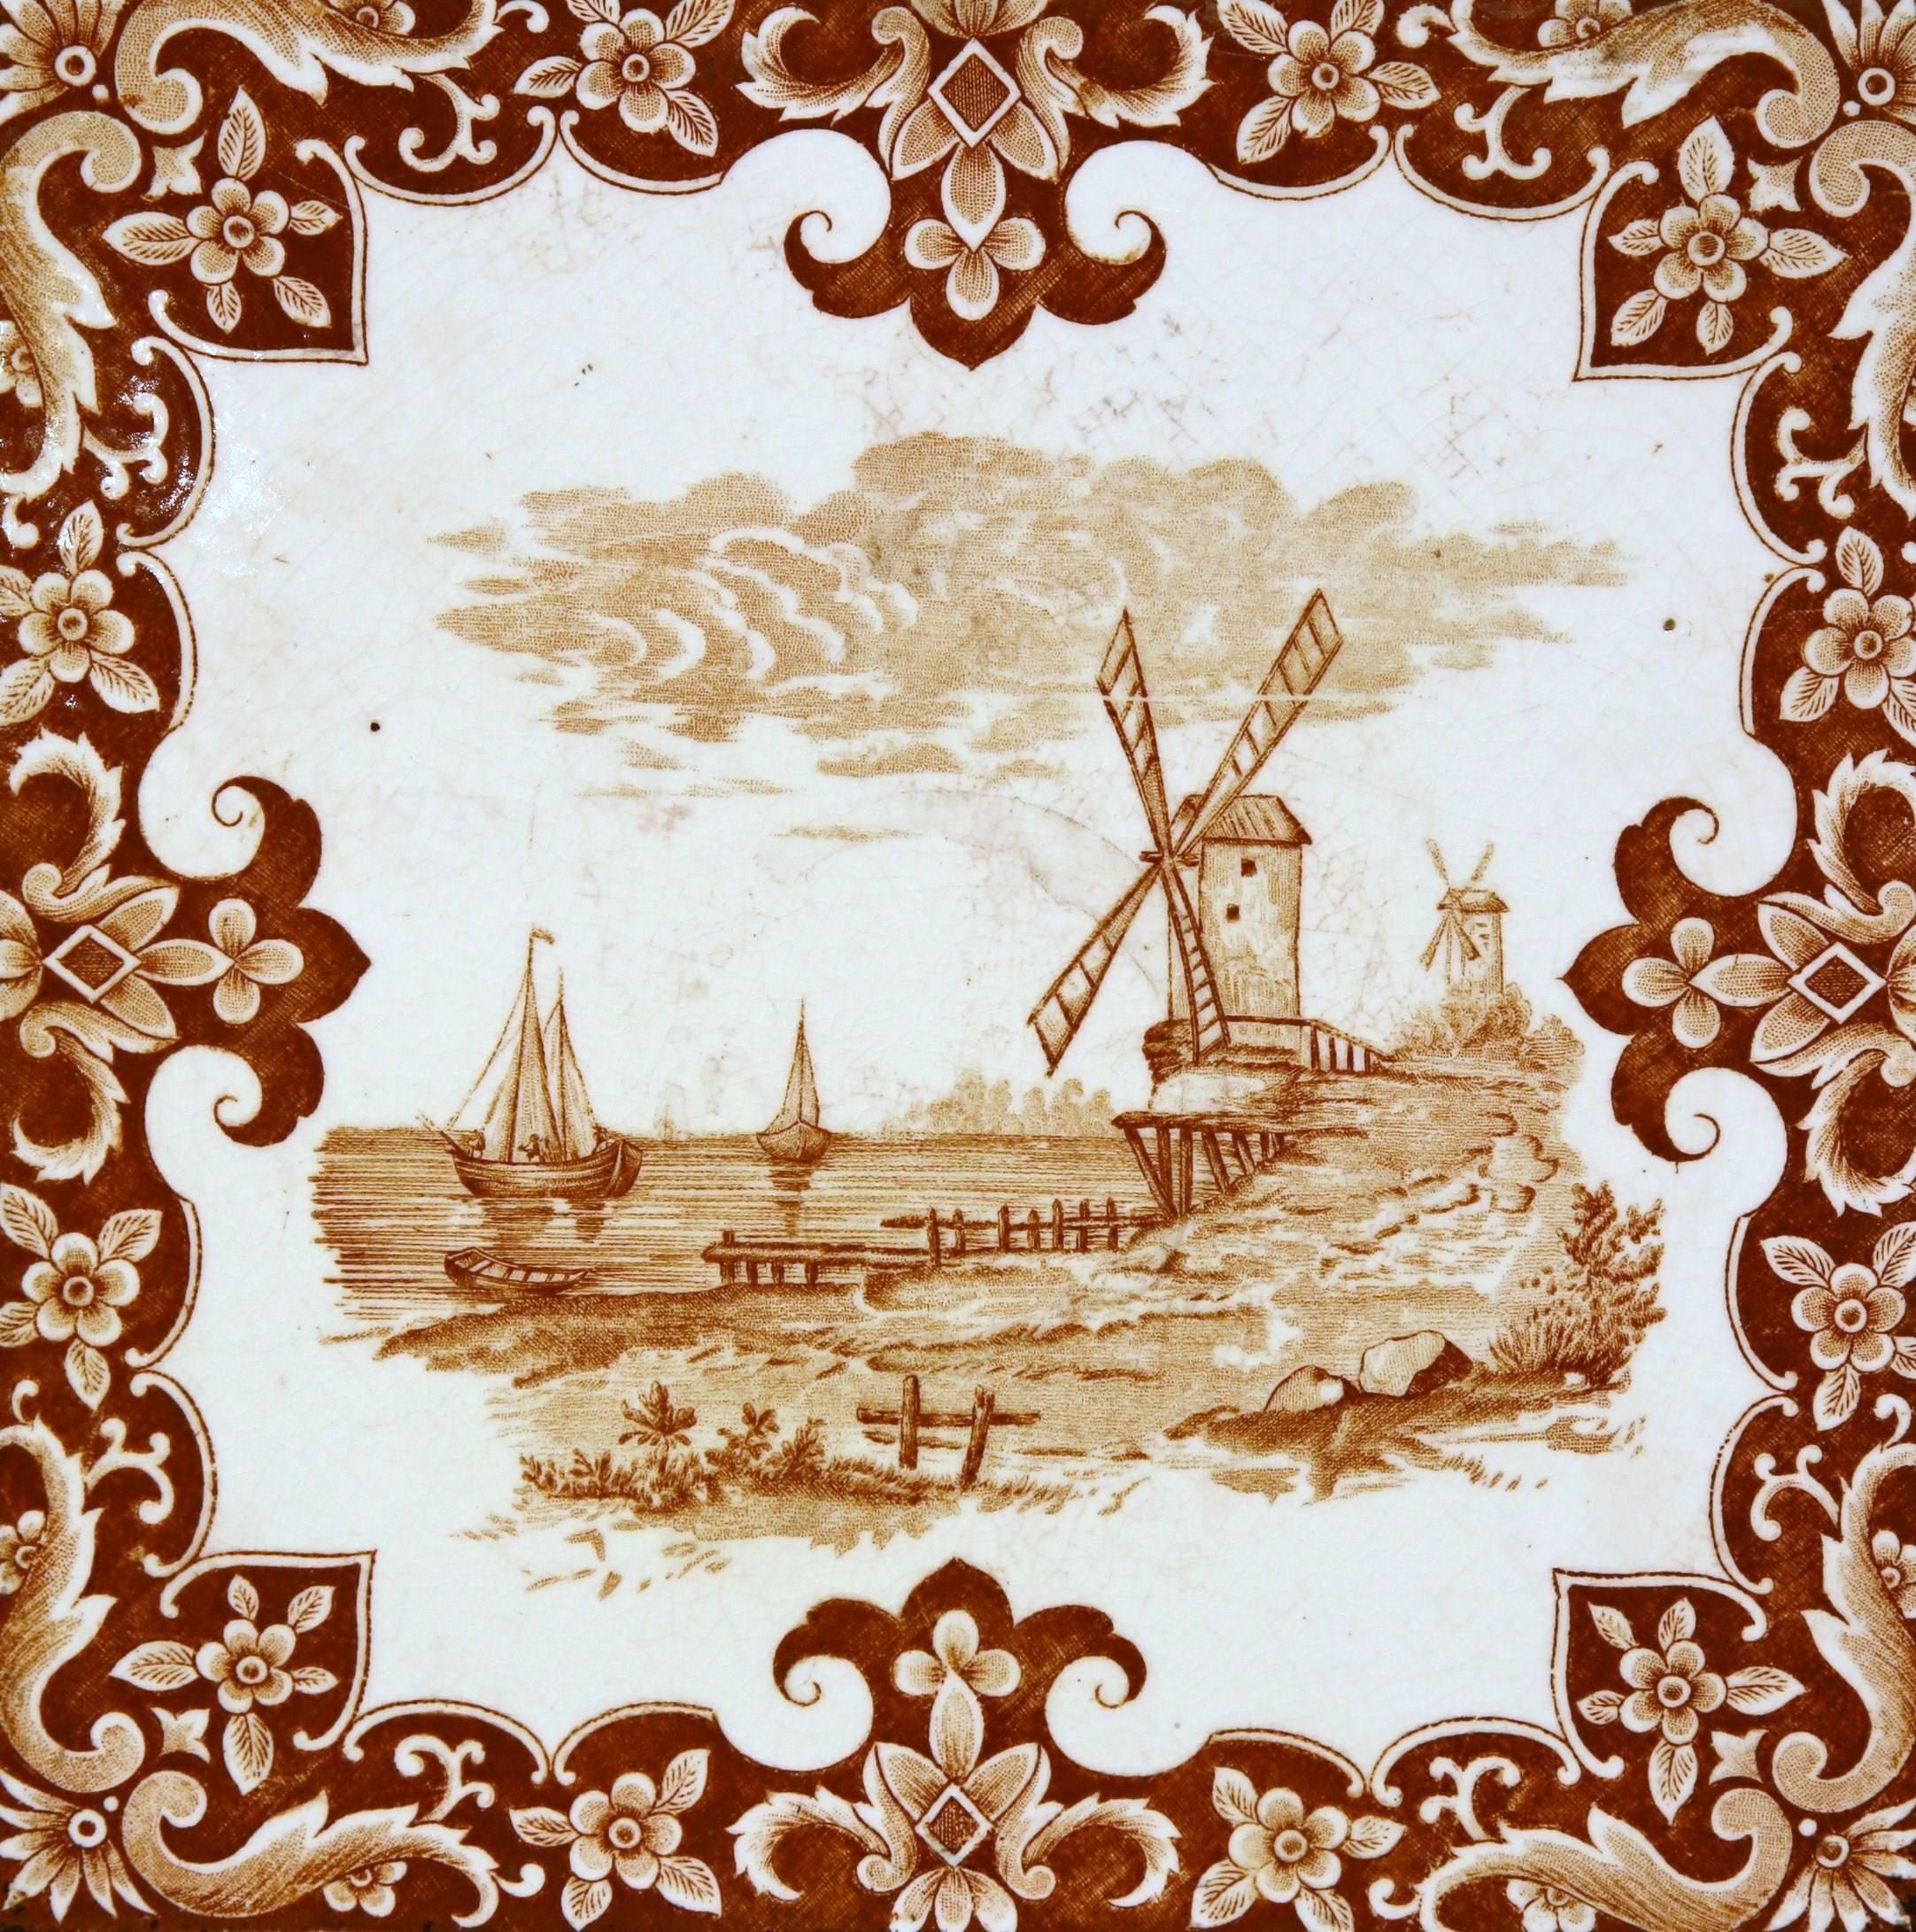 This interesting, antique hot dish tray was crafted in France, circa 1870. The piece features a hand painted centre tile with a windmill and sailboats in a brown and white palette. The ceramic tile is set inside a carved wood frame. The tray